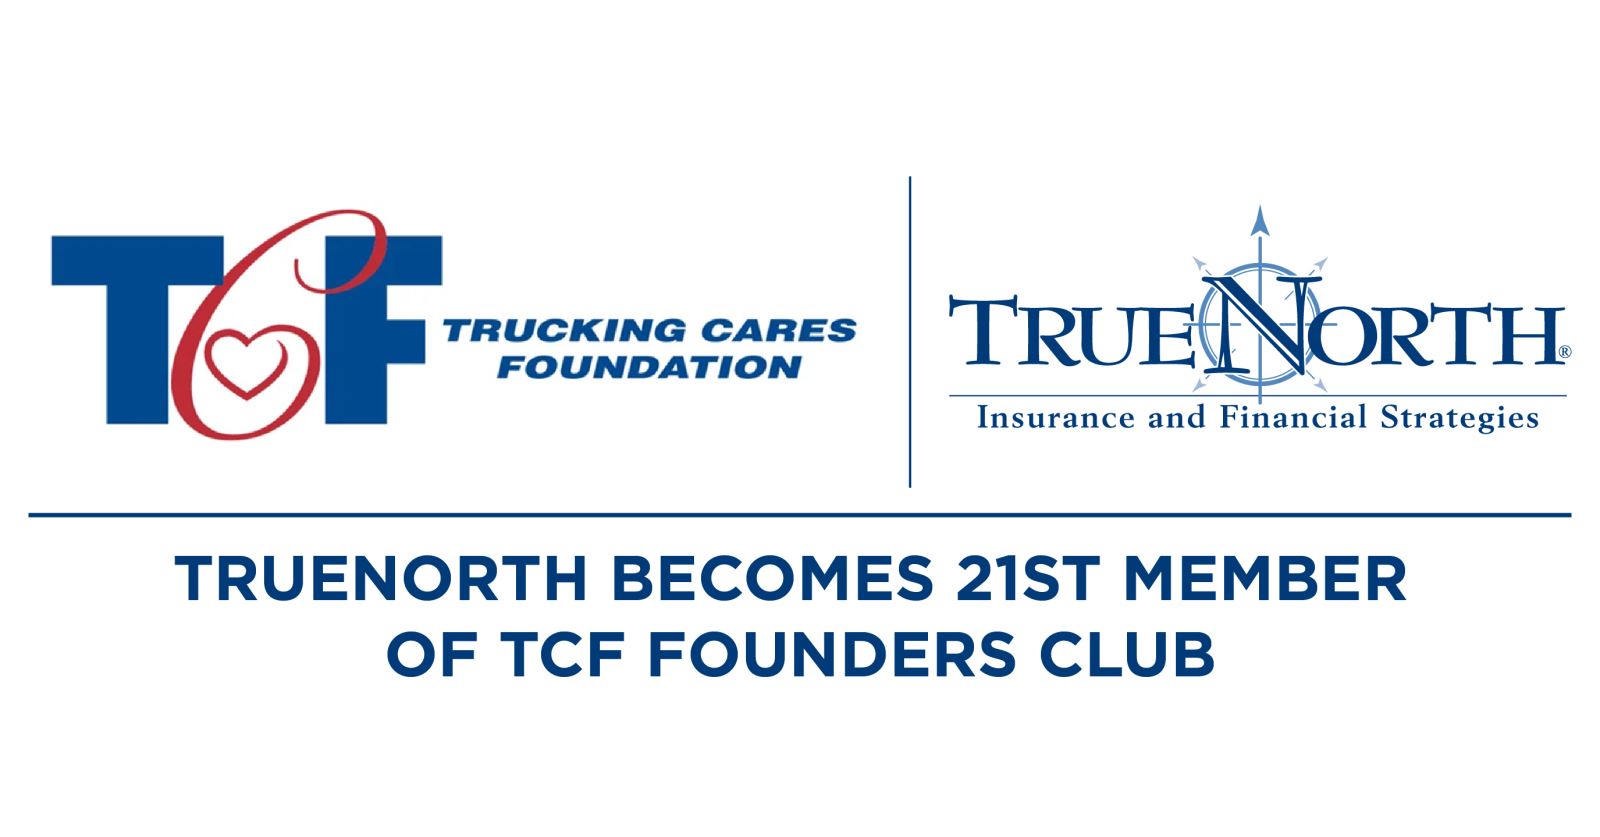 TrueNorth Becomes 21st member of TCF Founders Club